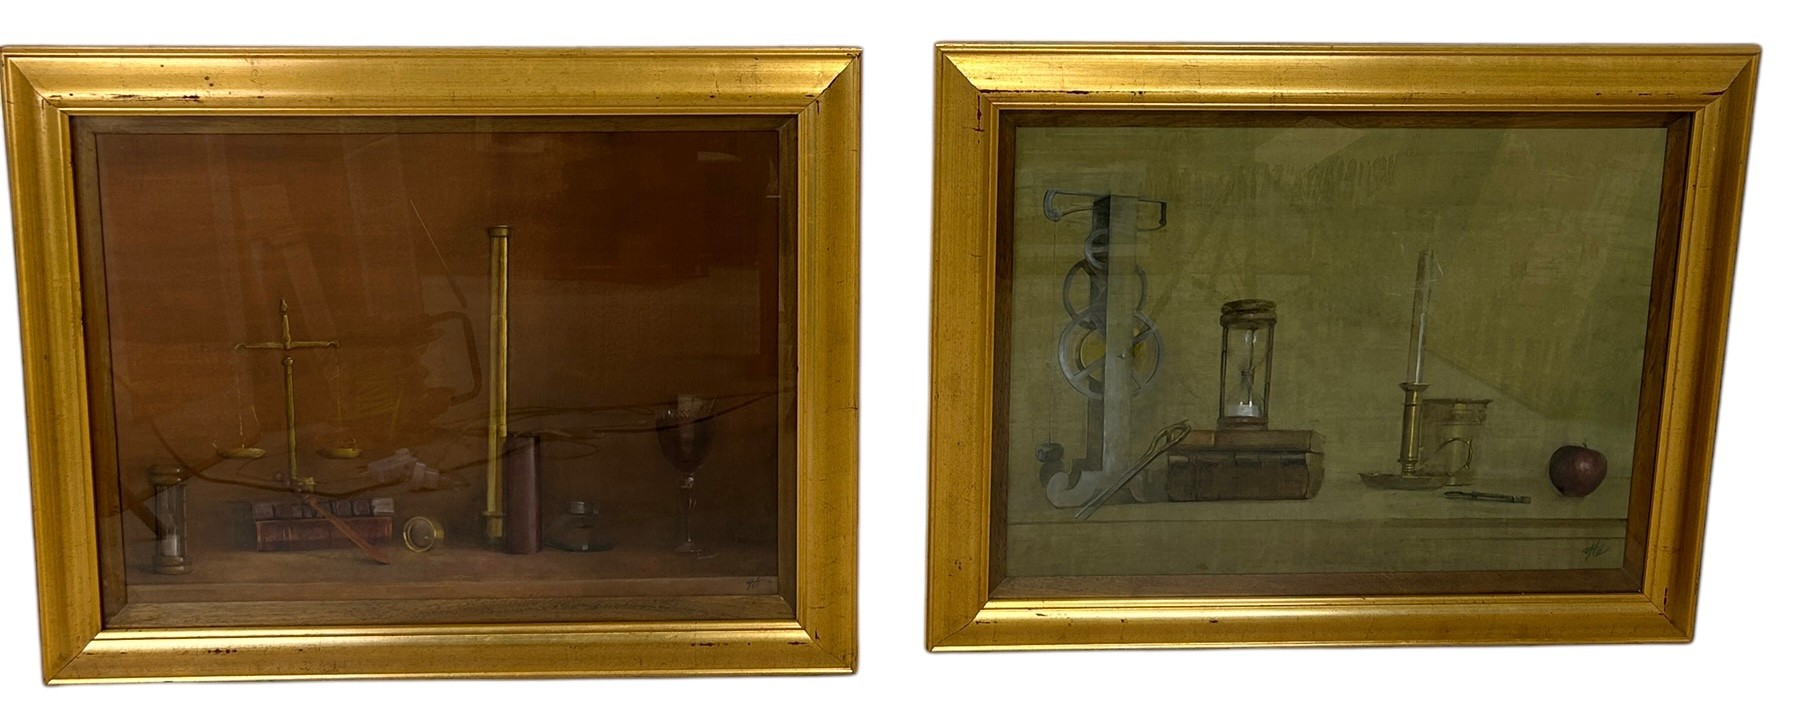 A PAIR OF OIL PAINTINGS ON CANVAS DEPICTING ALCHEMIST SCENE (2), Mounted in frames and glazed.